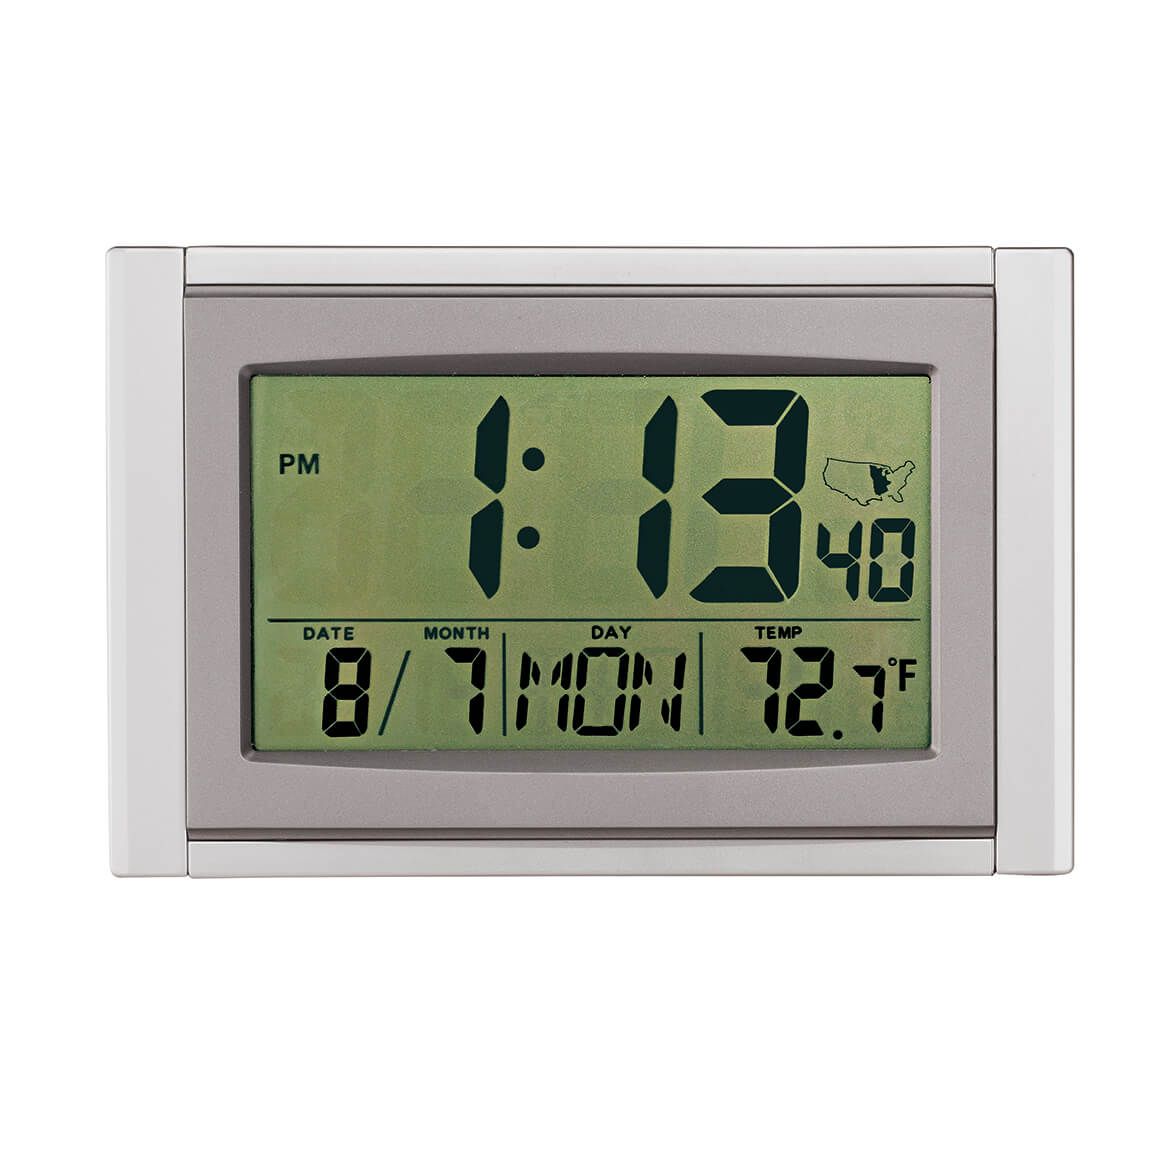 5 in 1 Large LCD Atomic Clock + '-' + 346925